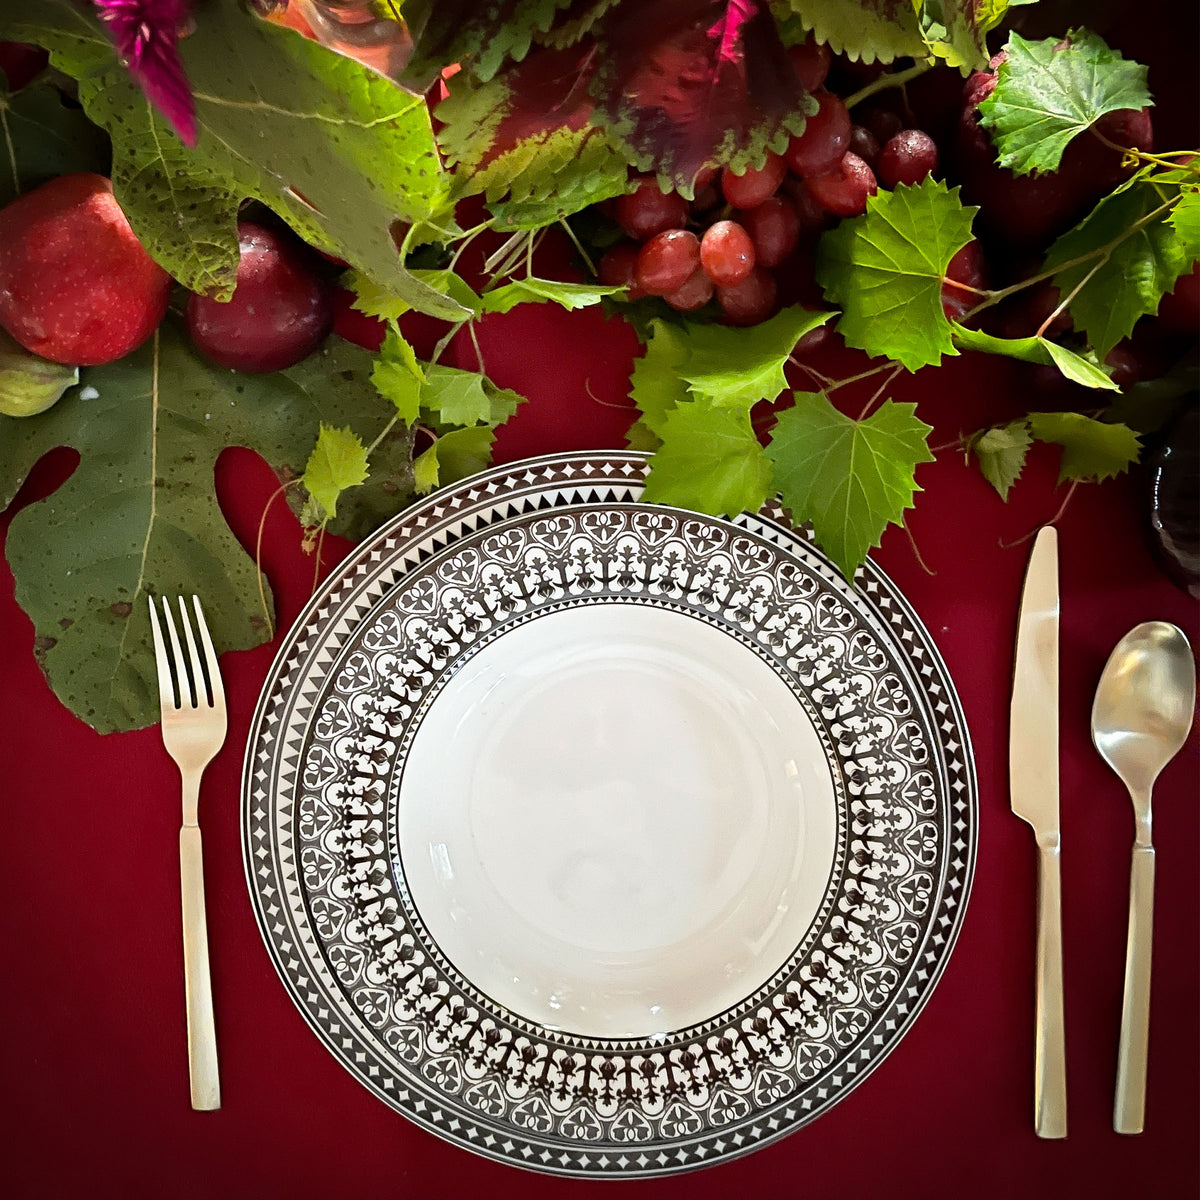 Elegant table setting with Casablanca Rimmed Soup Bowls from the Caskata Artisanal Home Geometrics Collection on a red tablecloth, surrounded by fresh fruits and foliage.